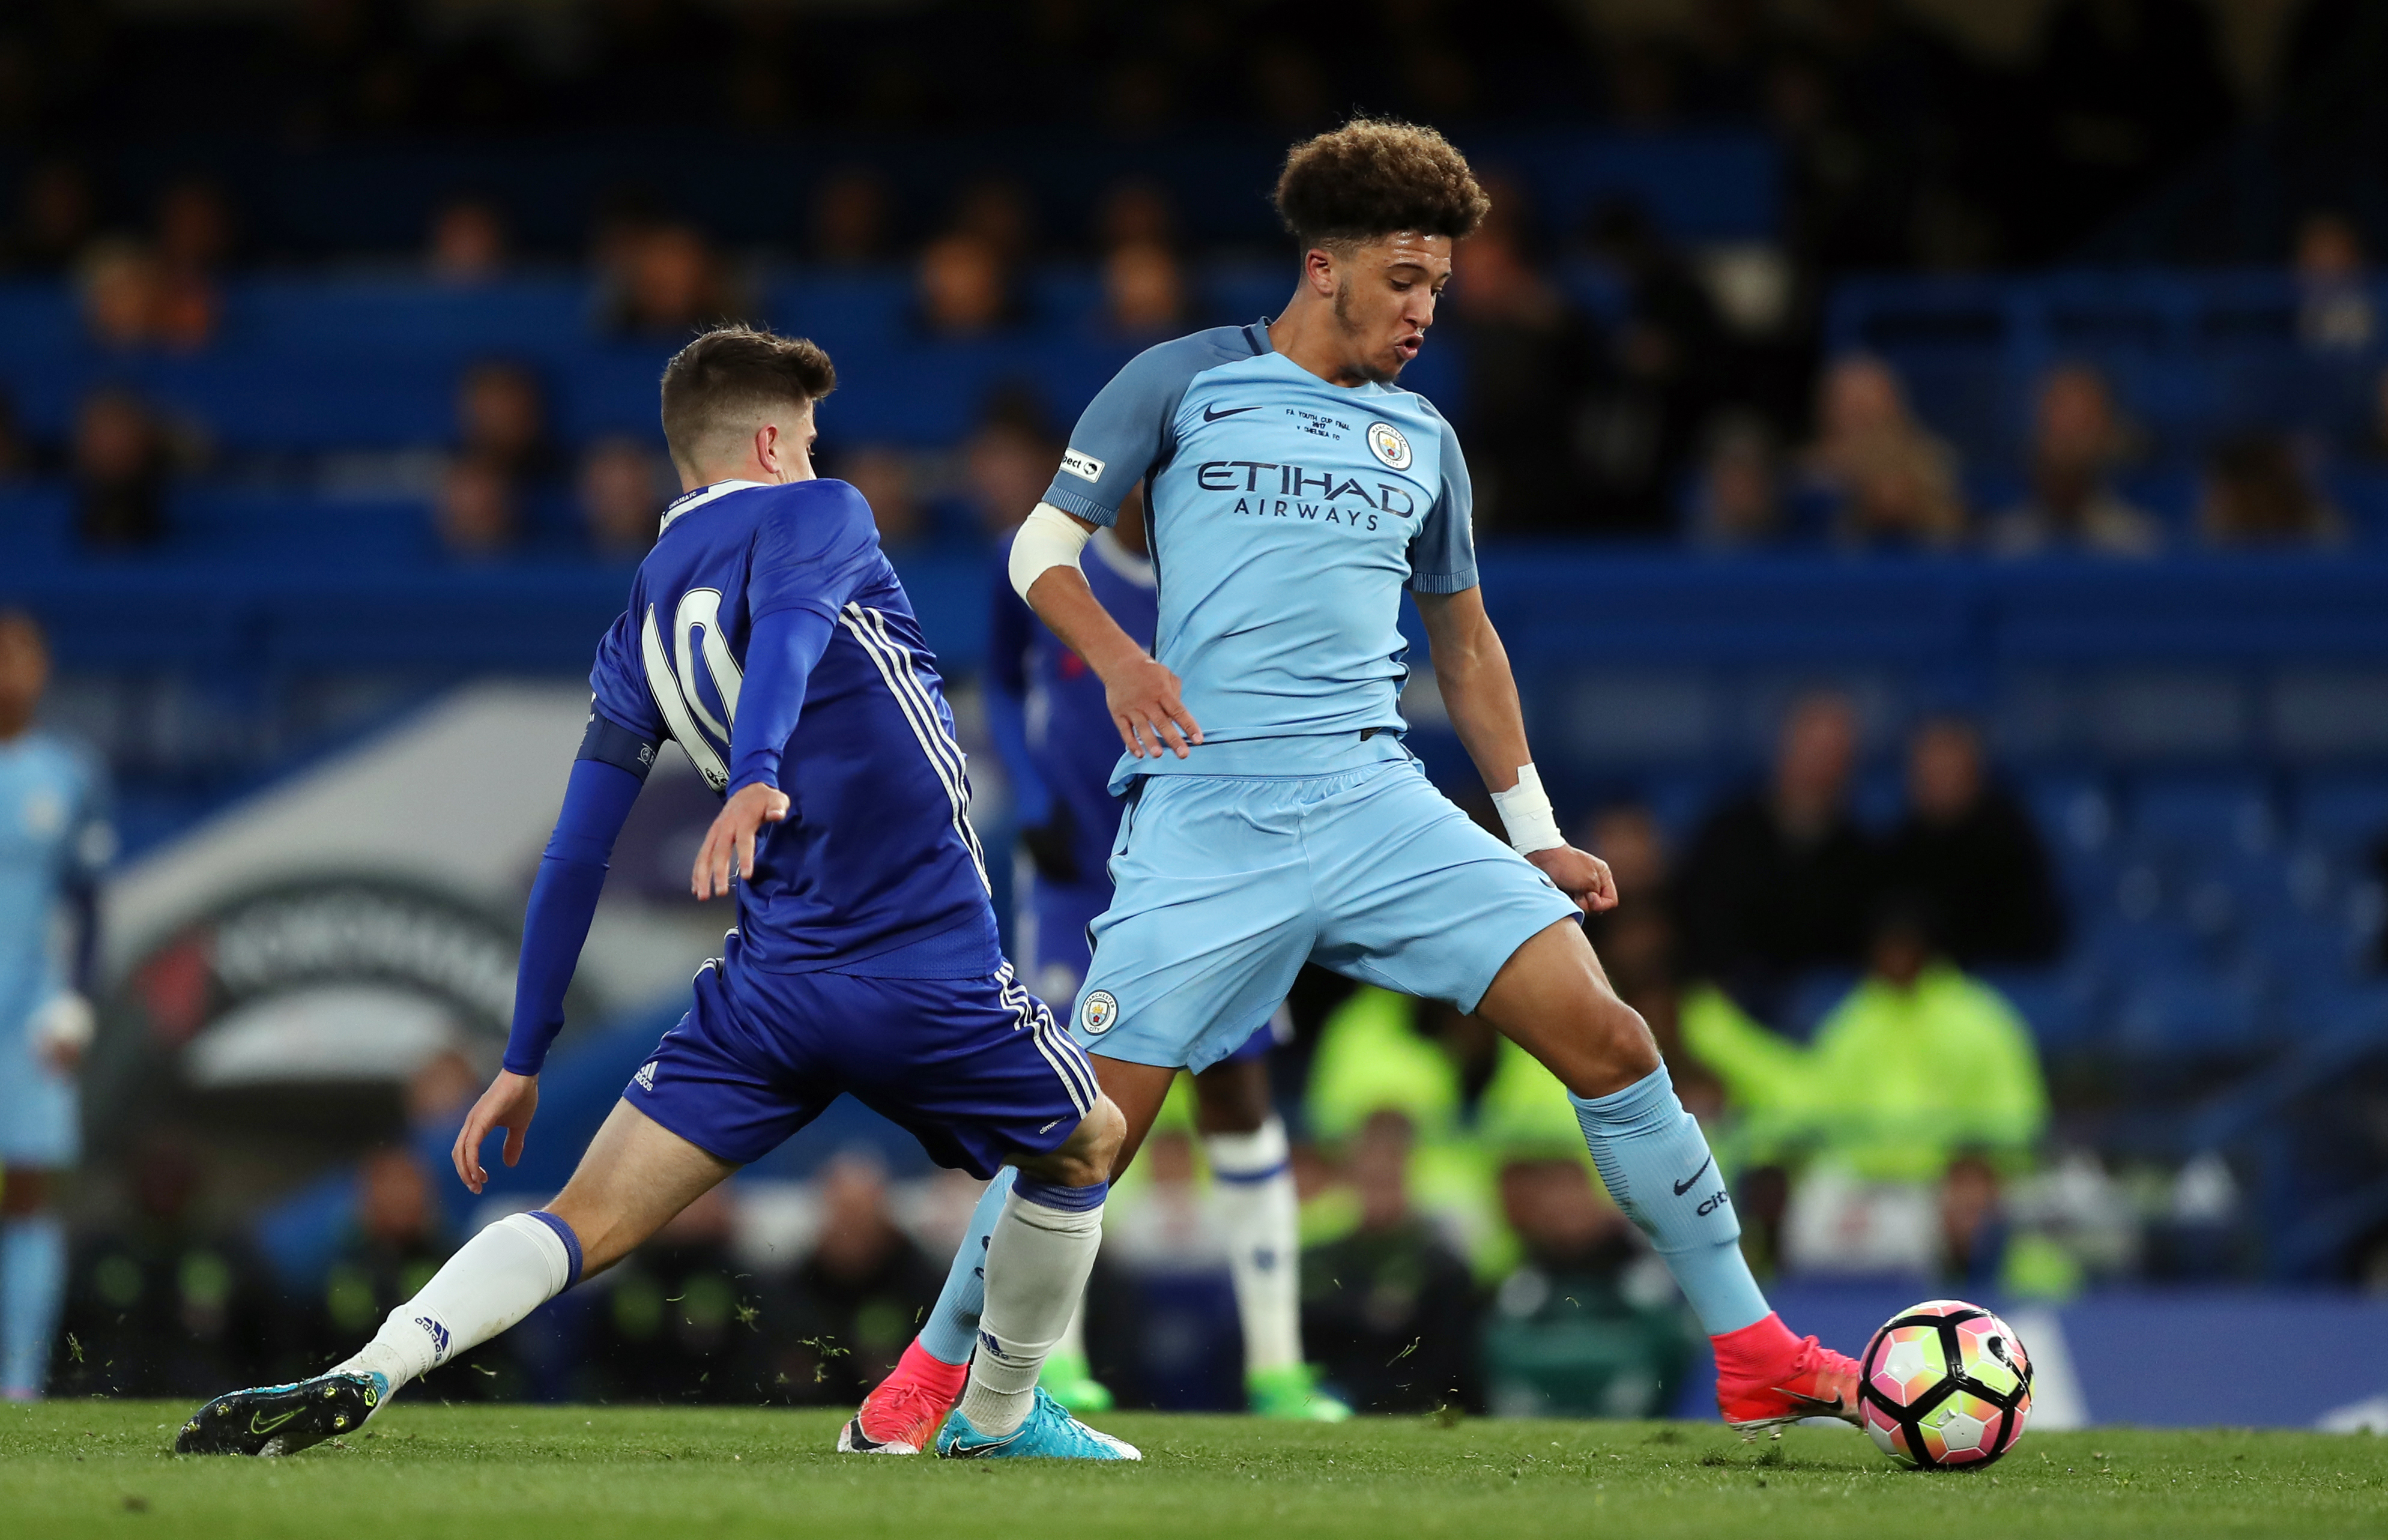 Sancho came through Manchester City's academy before joining Dortmund